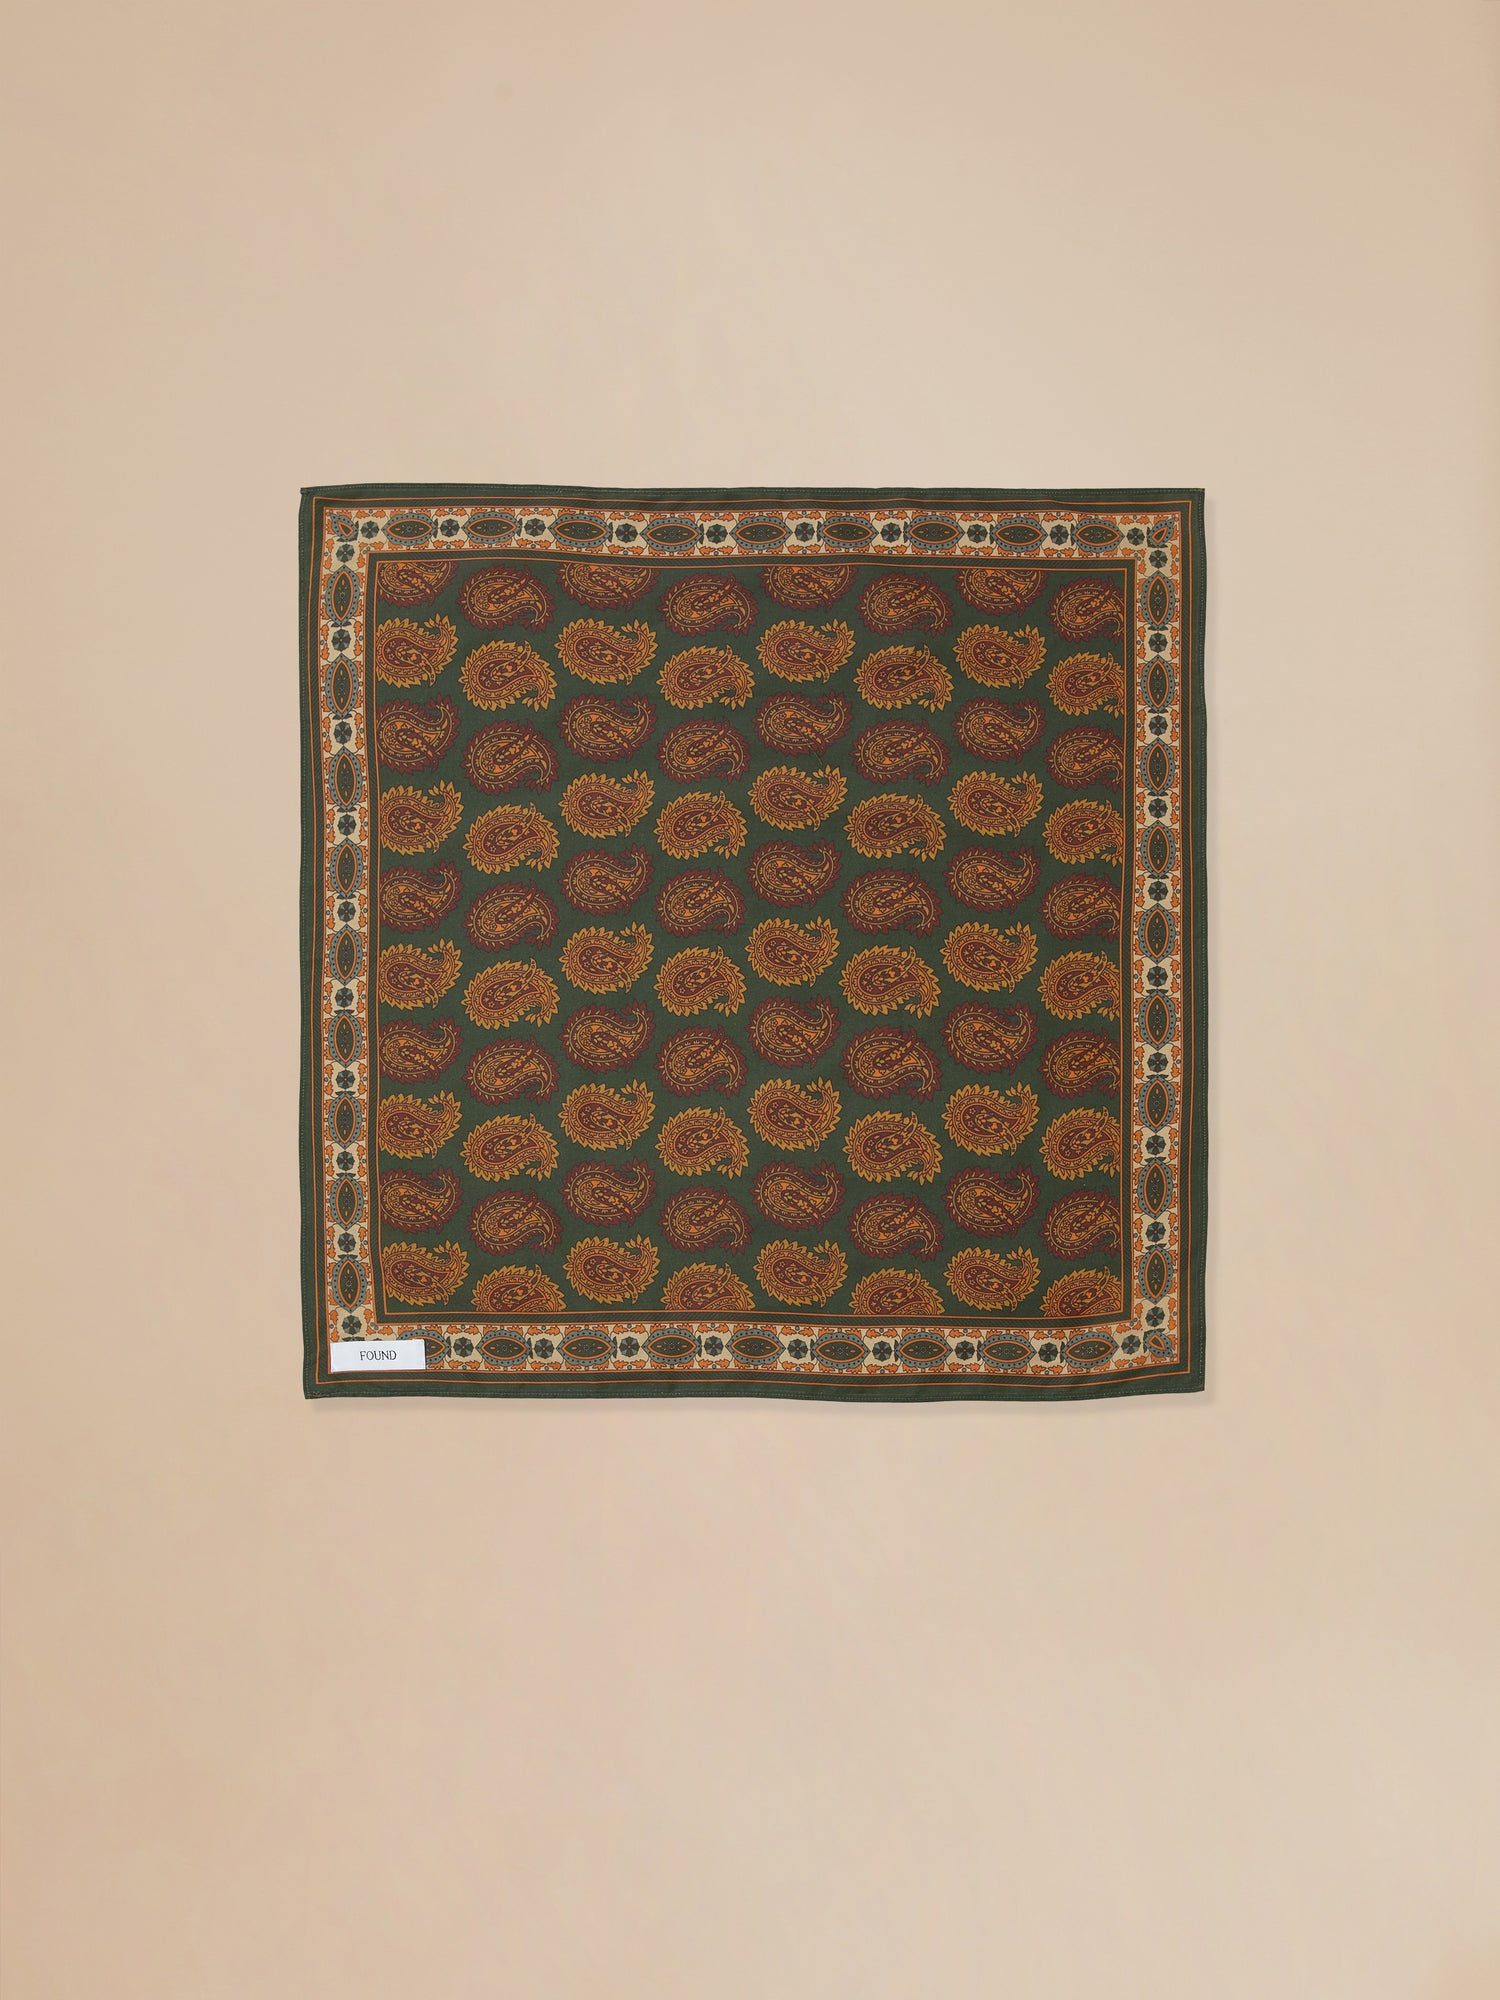 A brown and orange Coming Soon | Paisley Forest Bandana hanging on a beige wall, found by Found.